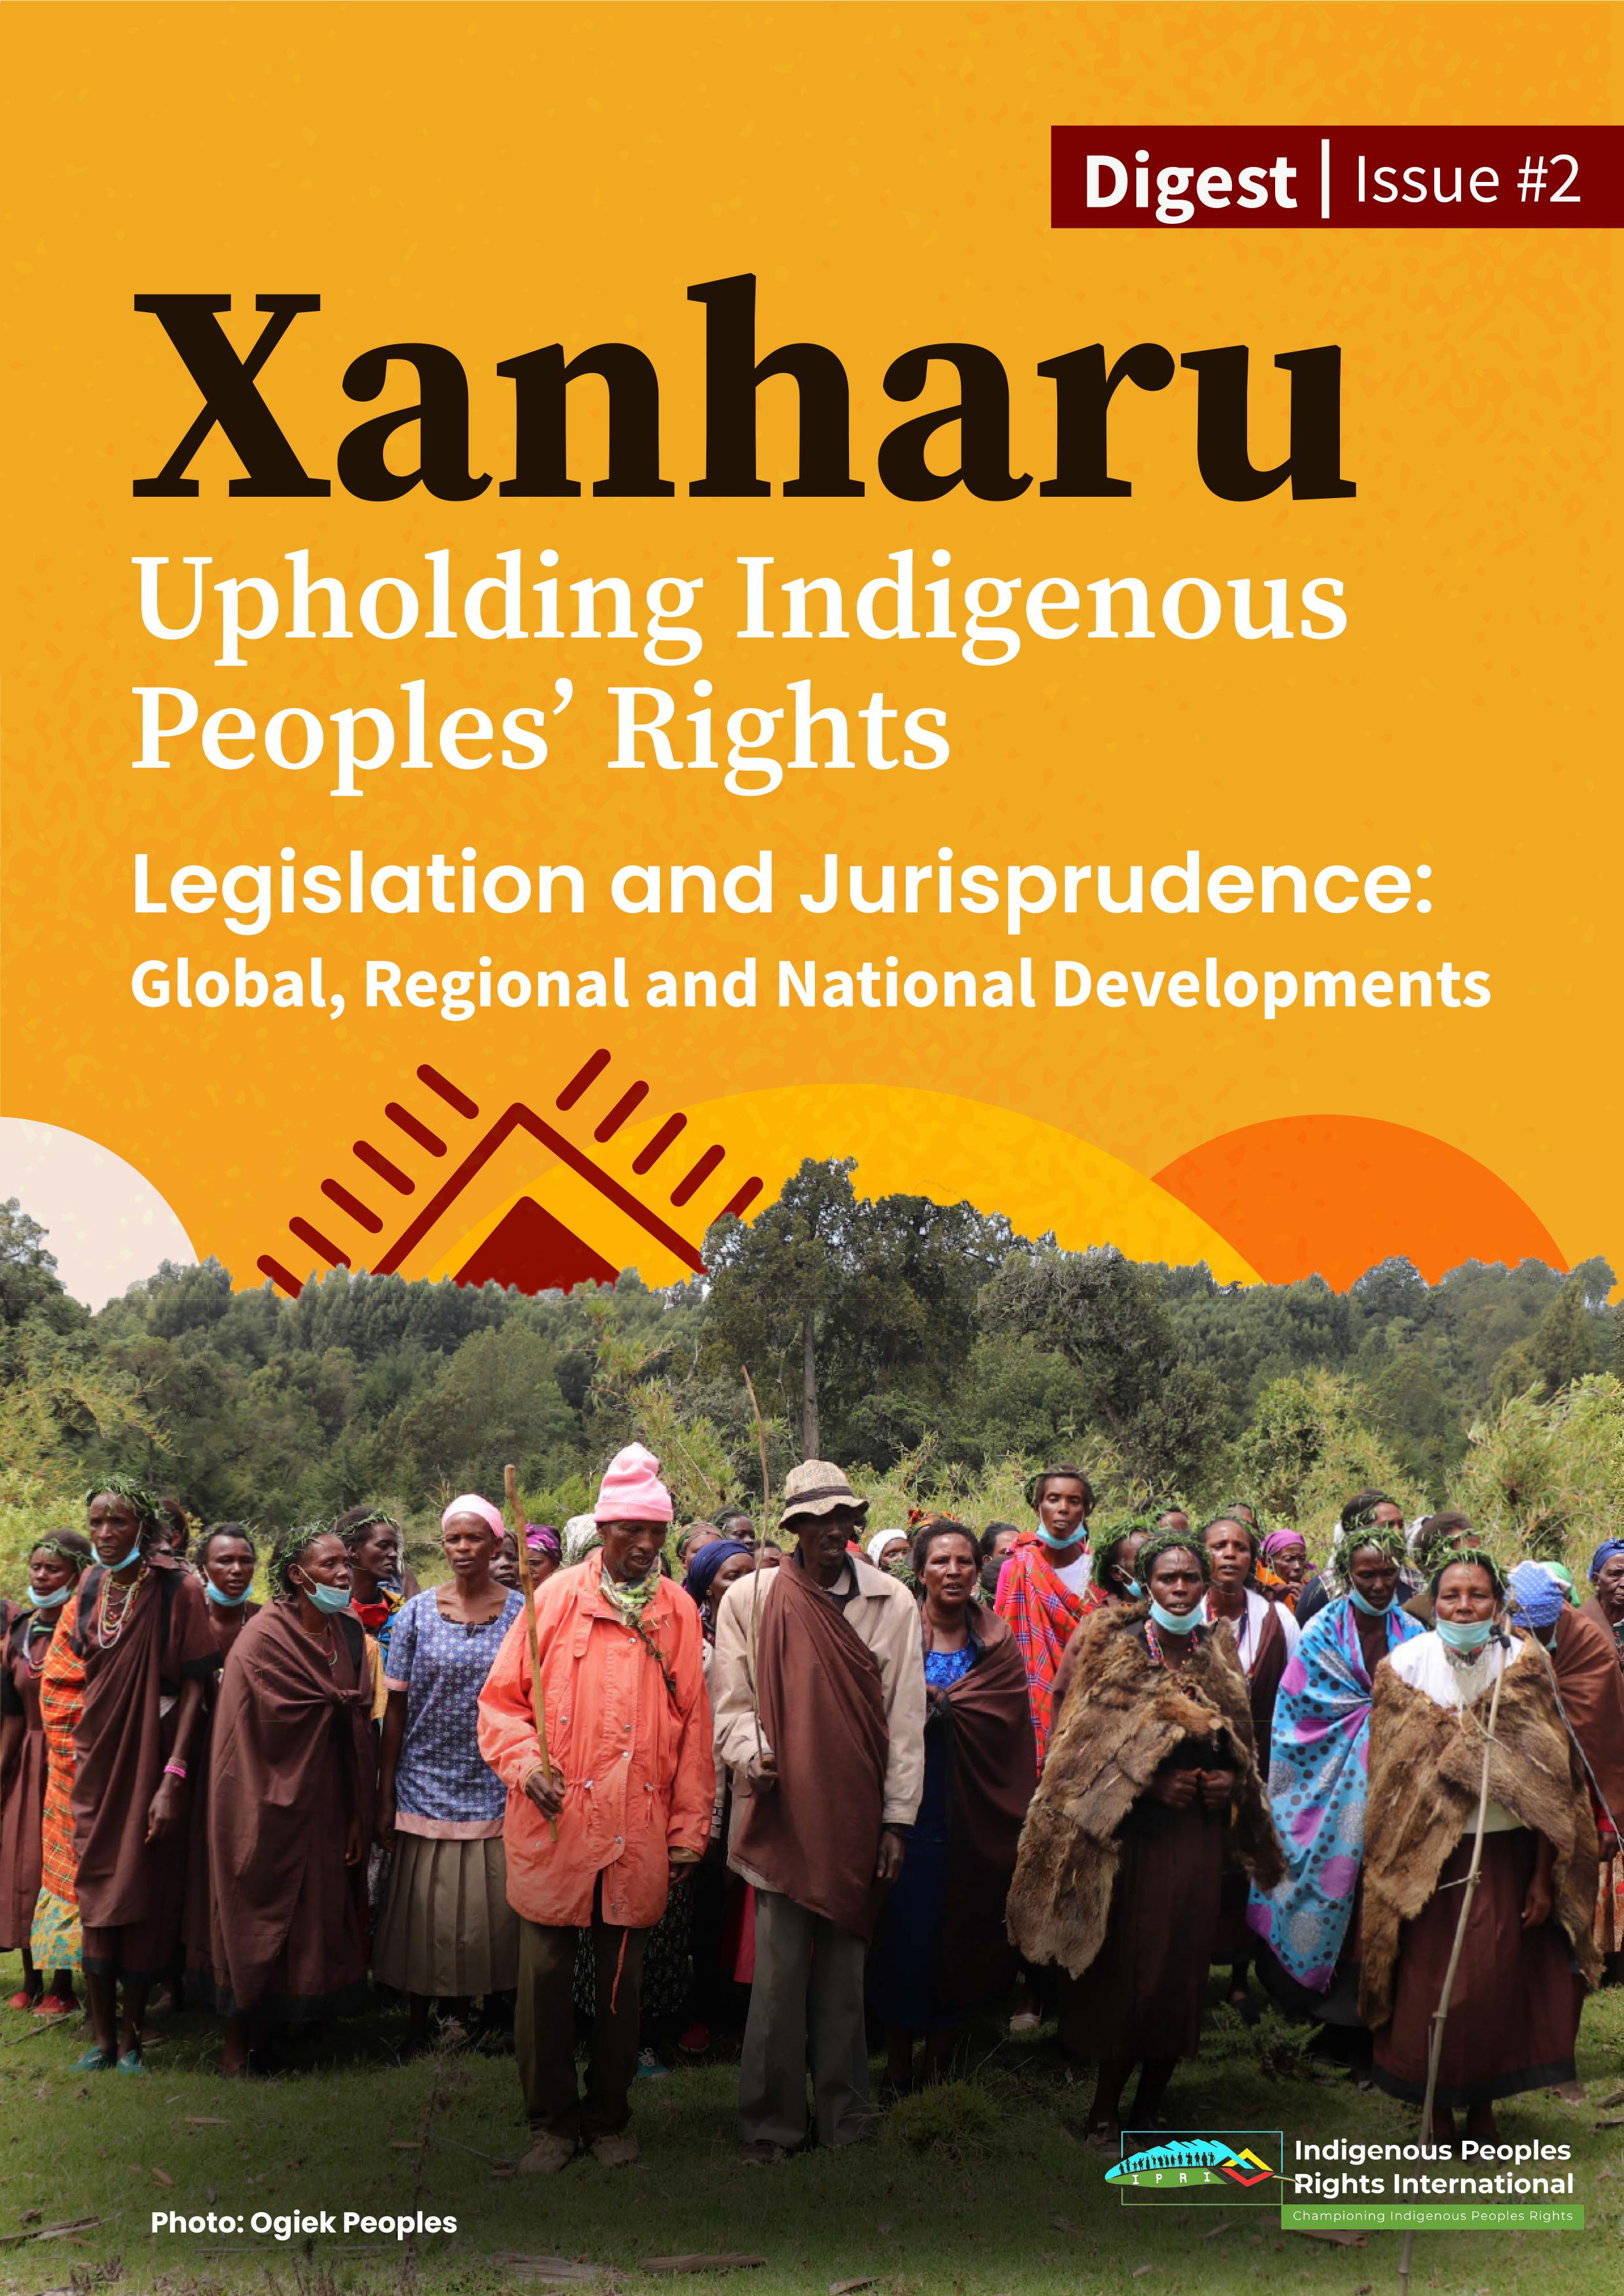 Xanharu: Upholding Indigenous Peoples' Rights